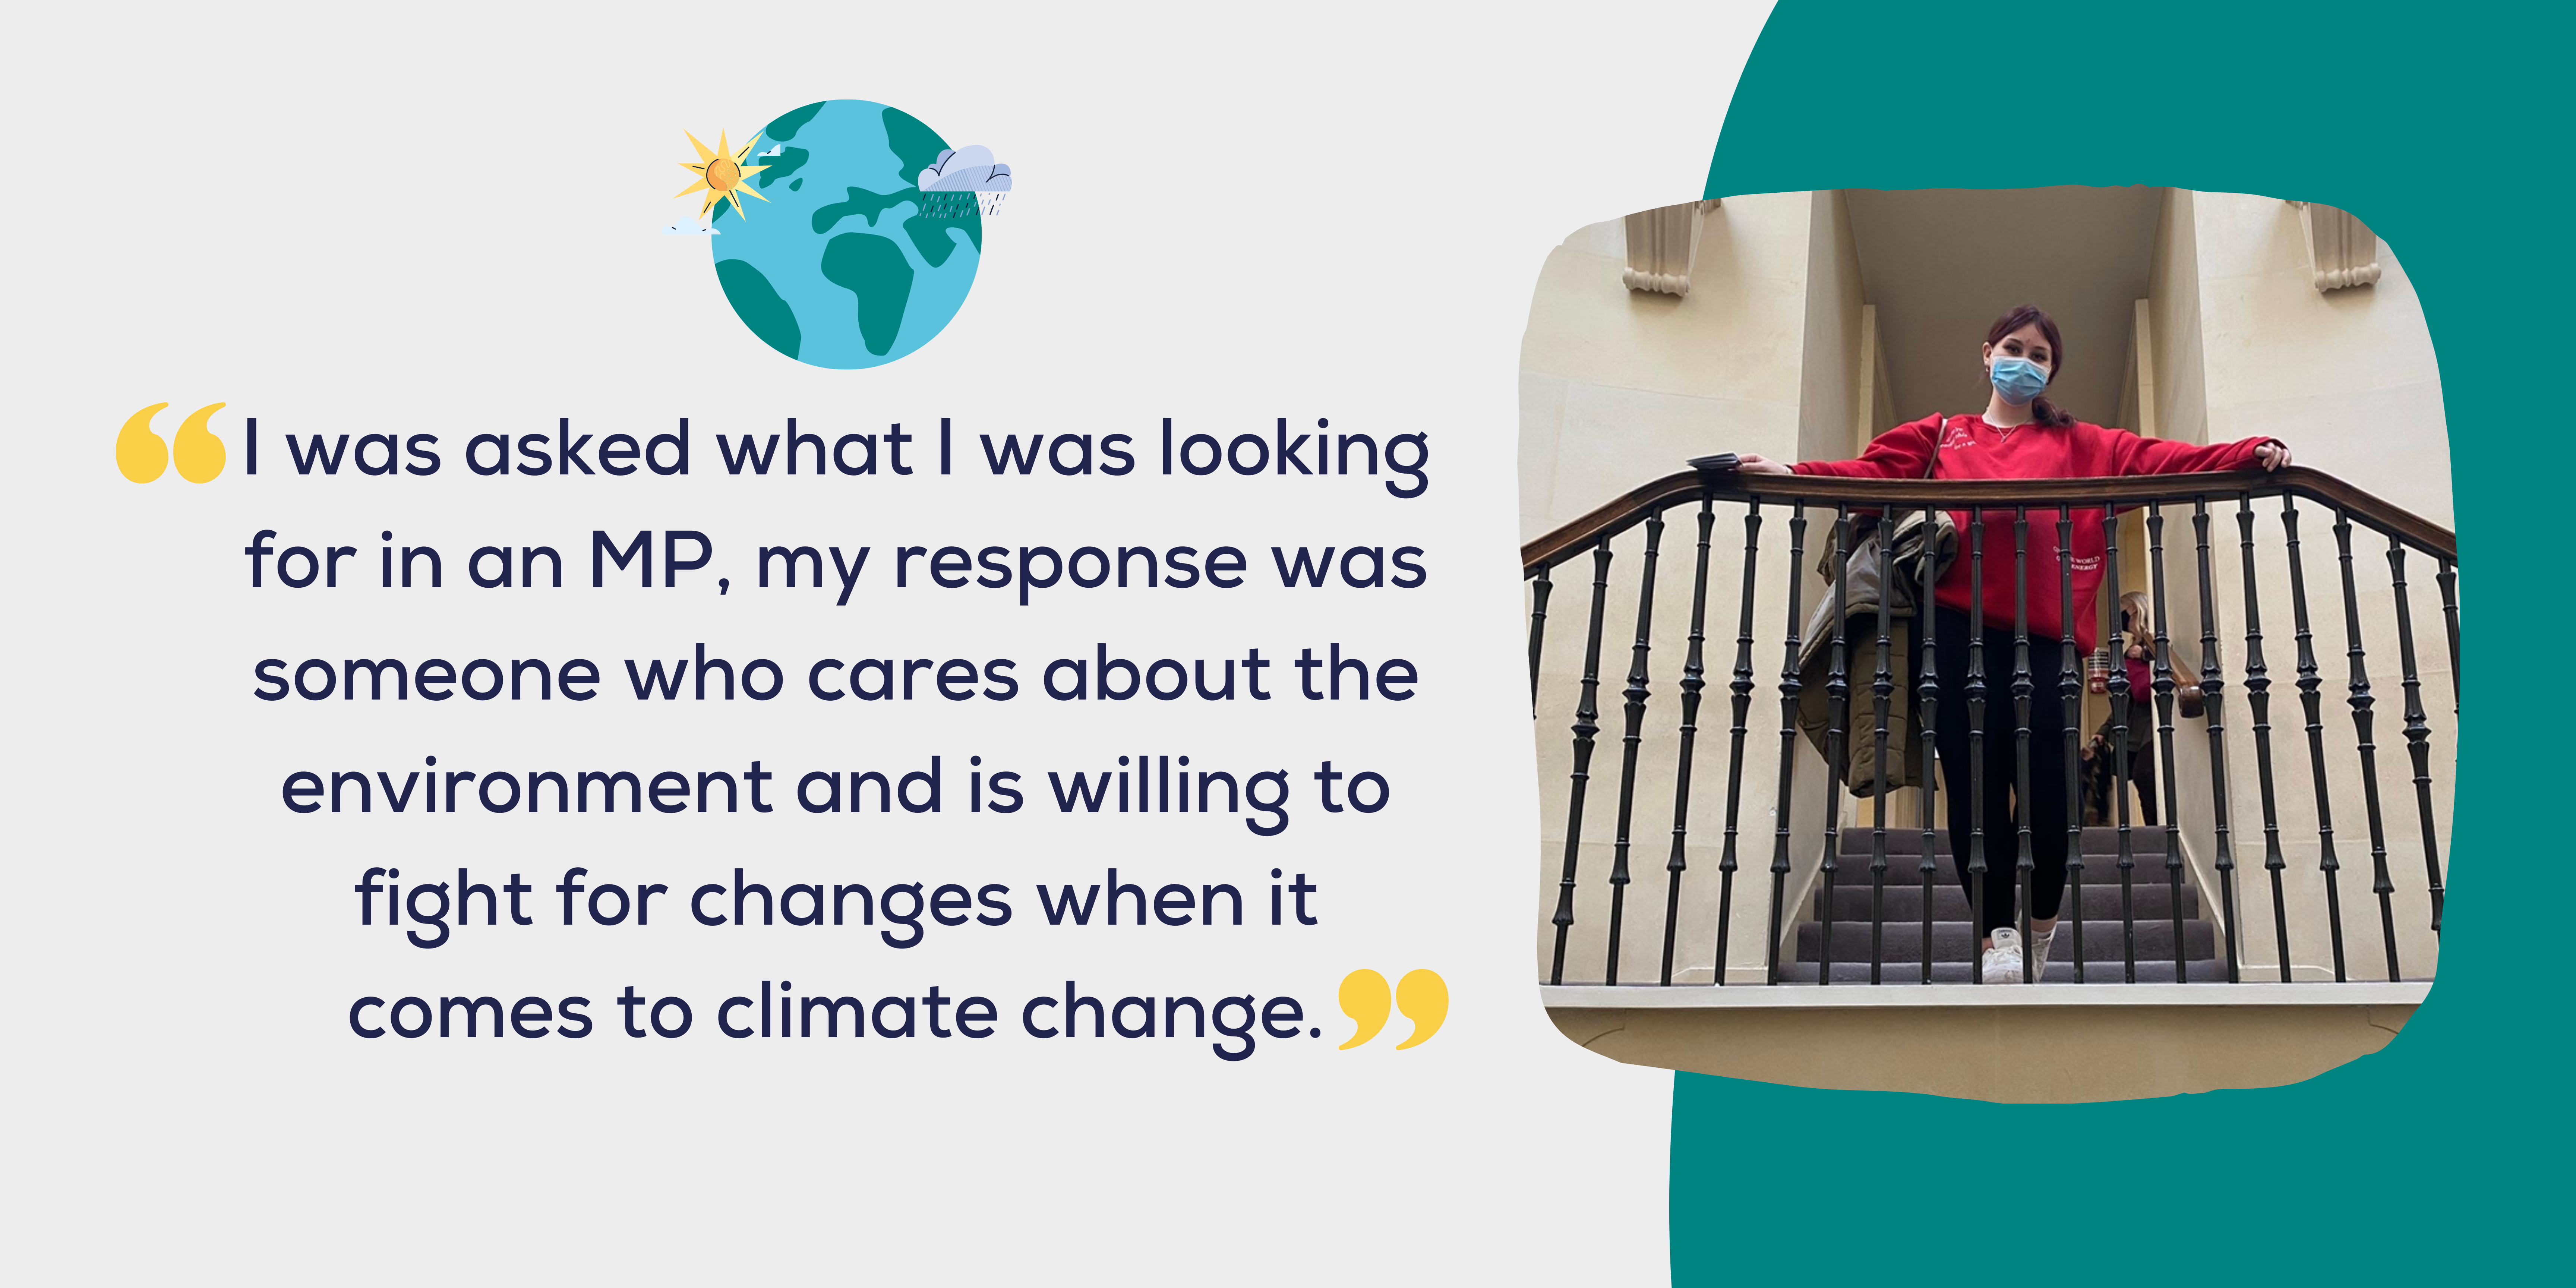 I was asked what I was looking for in an MP, my response was someone who cares about the environment and is willing to fight for changes when it comes to climate change.